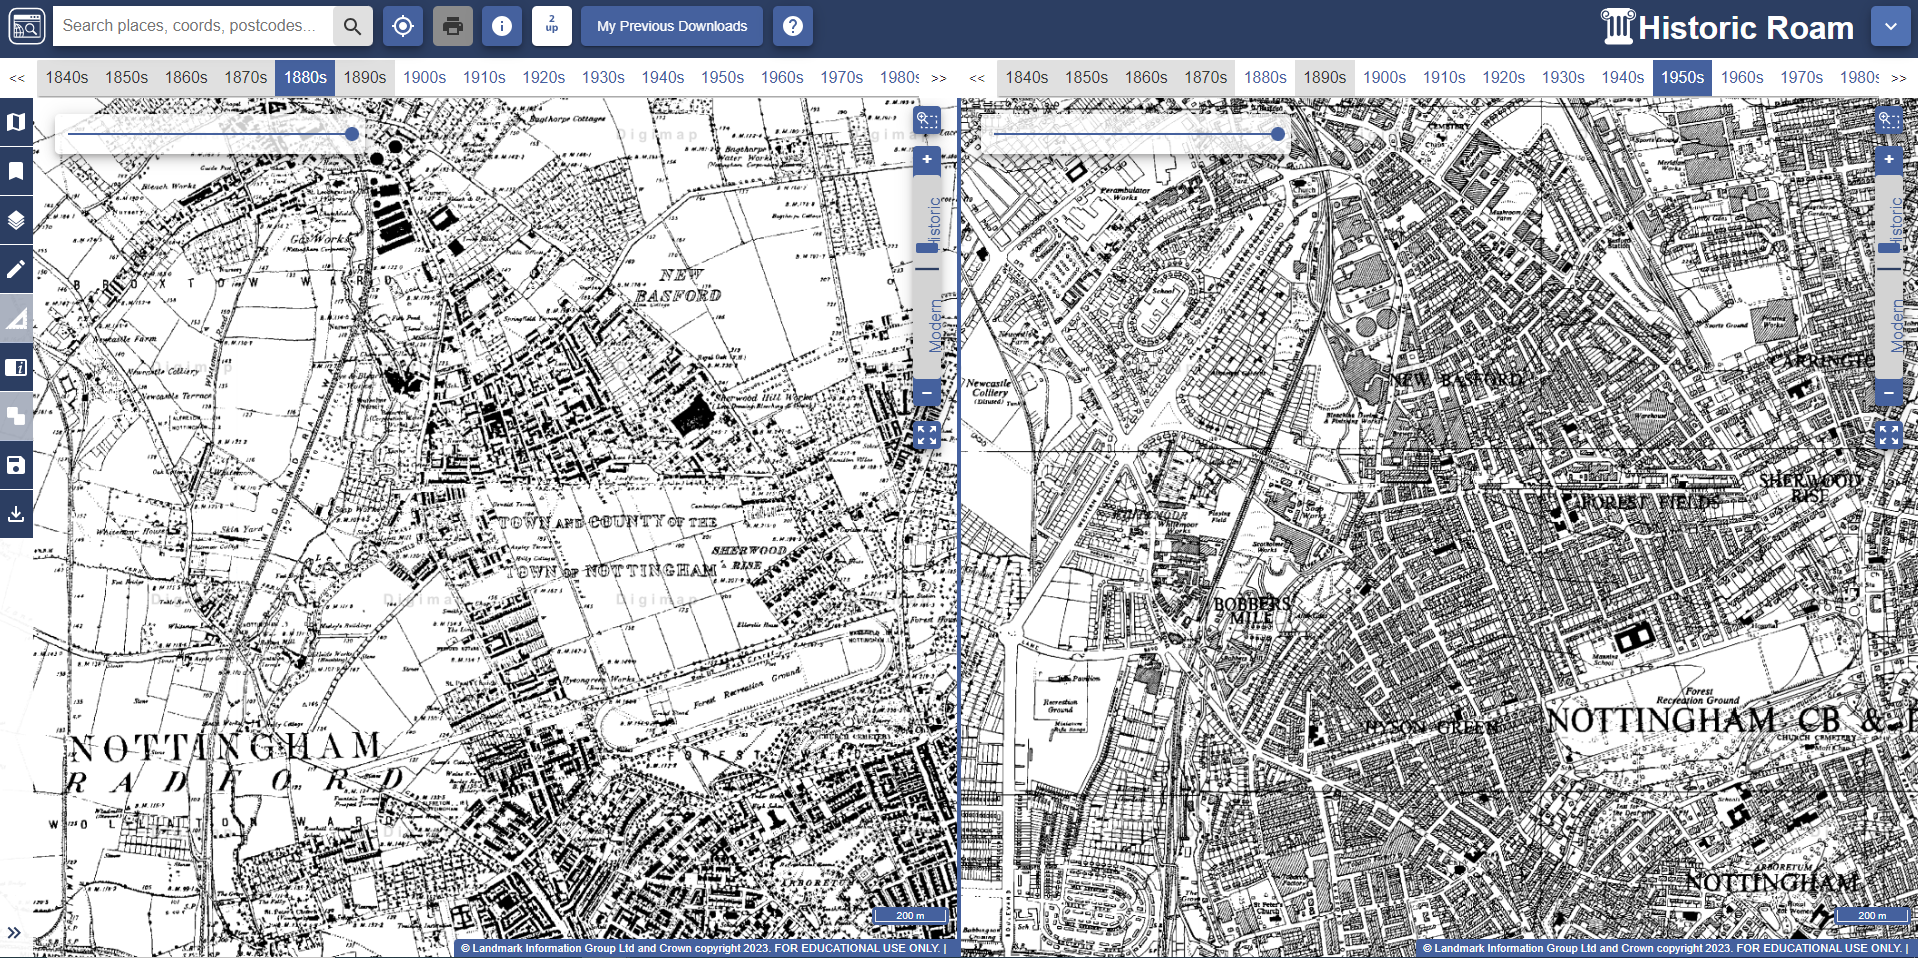 Comparing maps of Nottingham with 2up